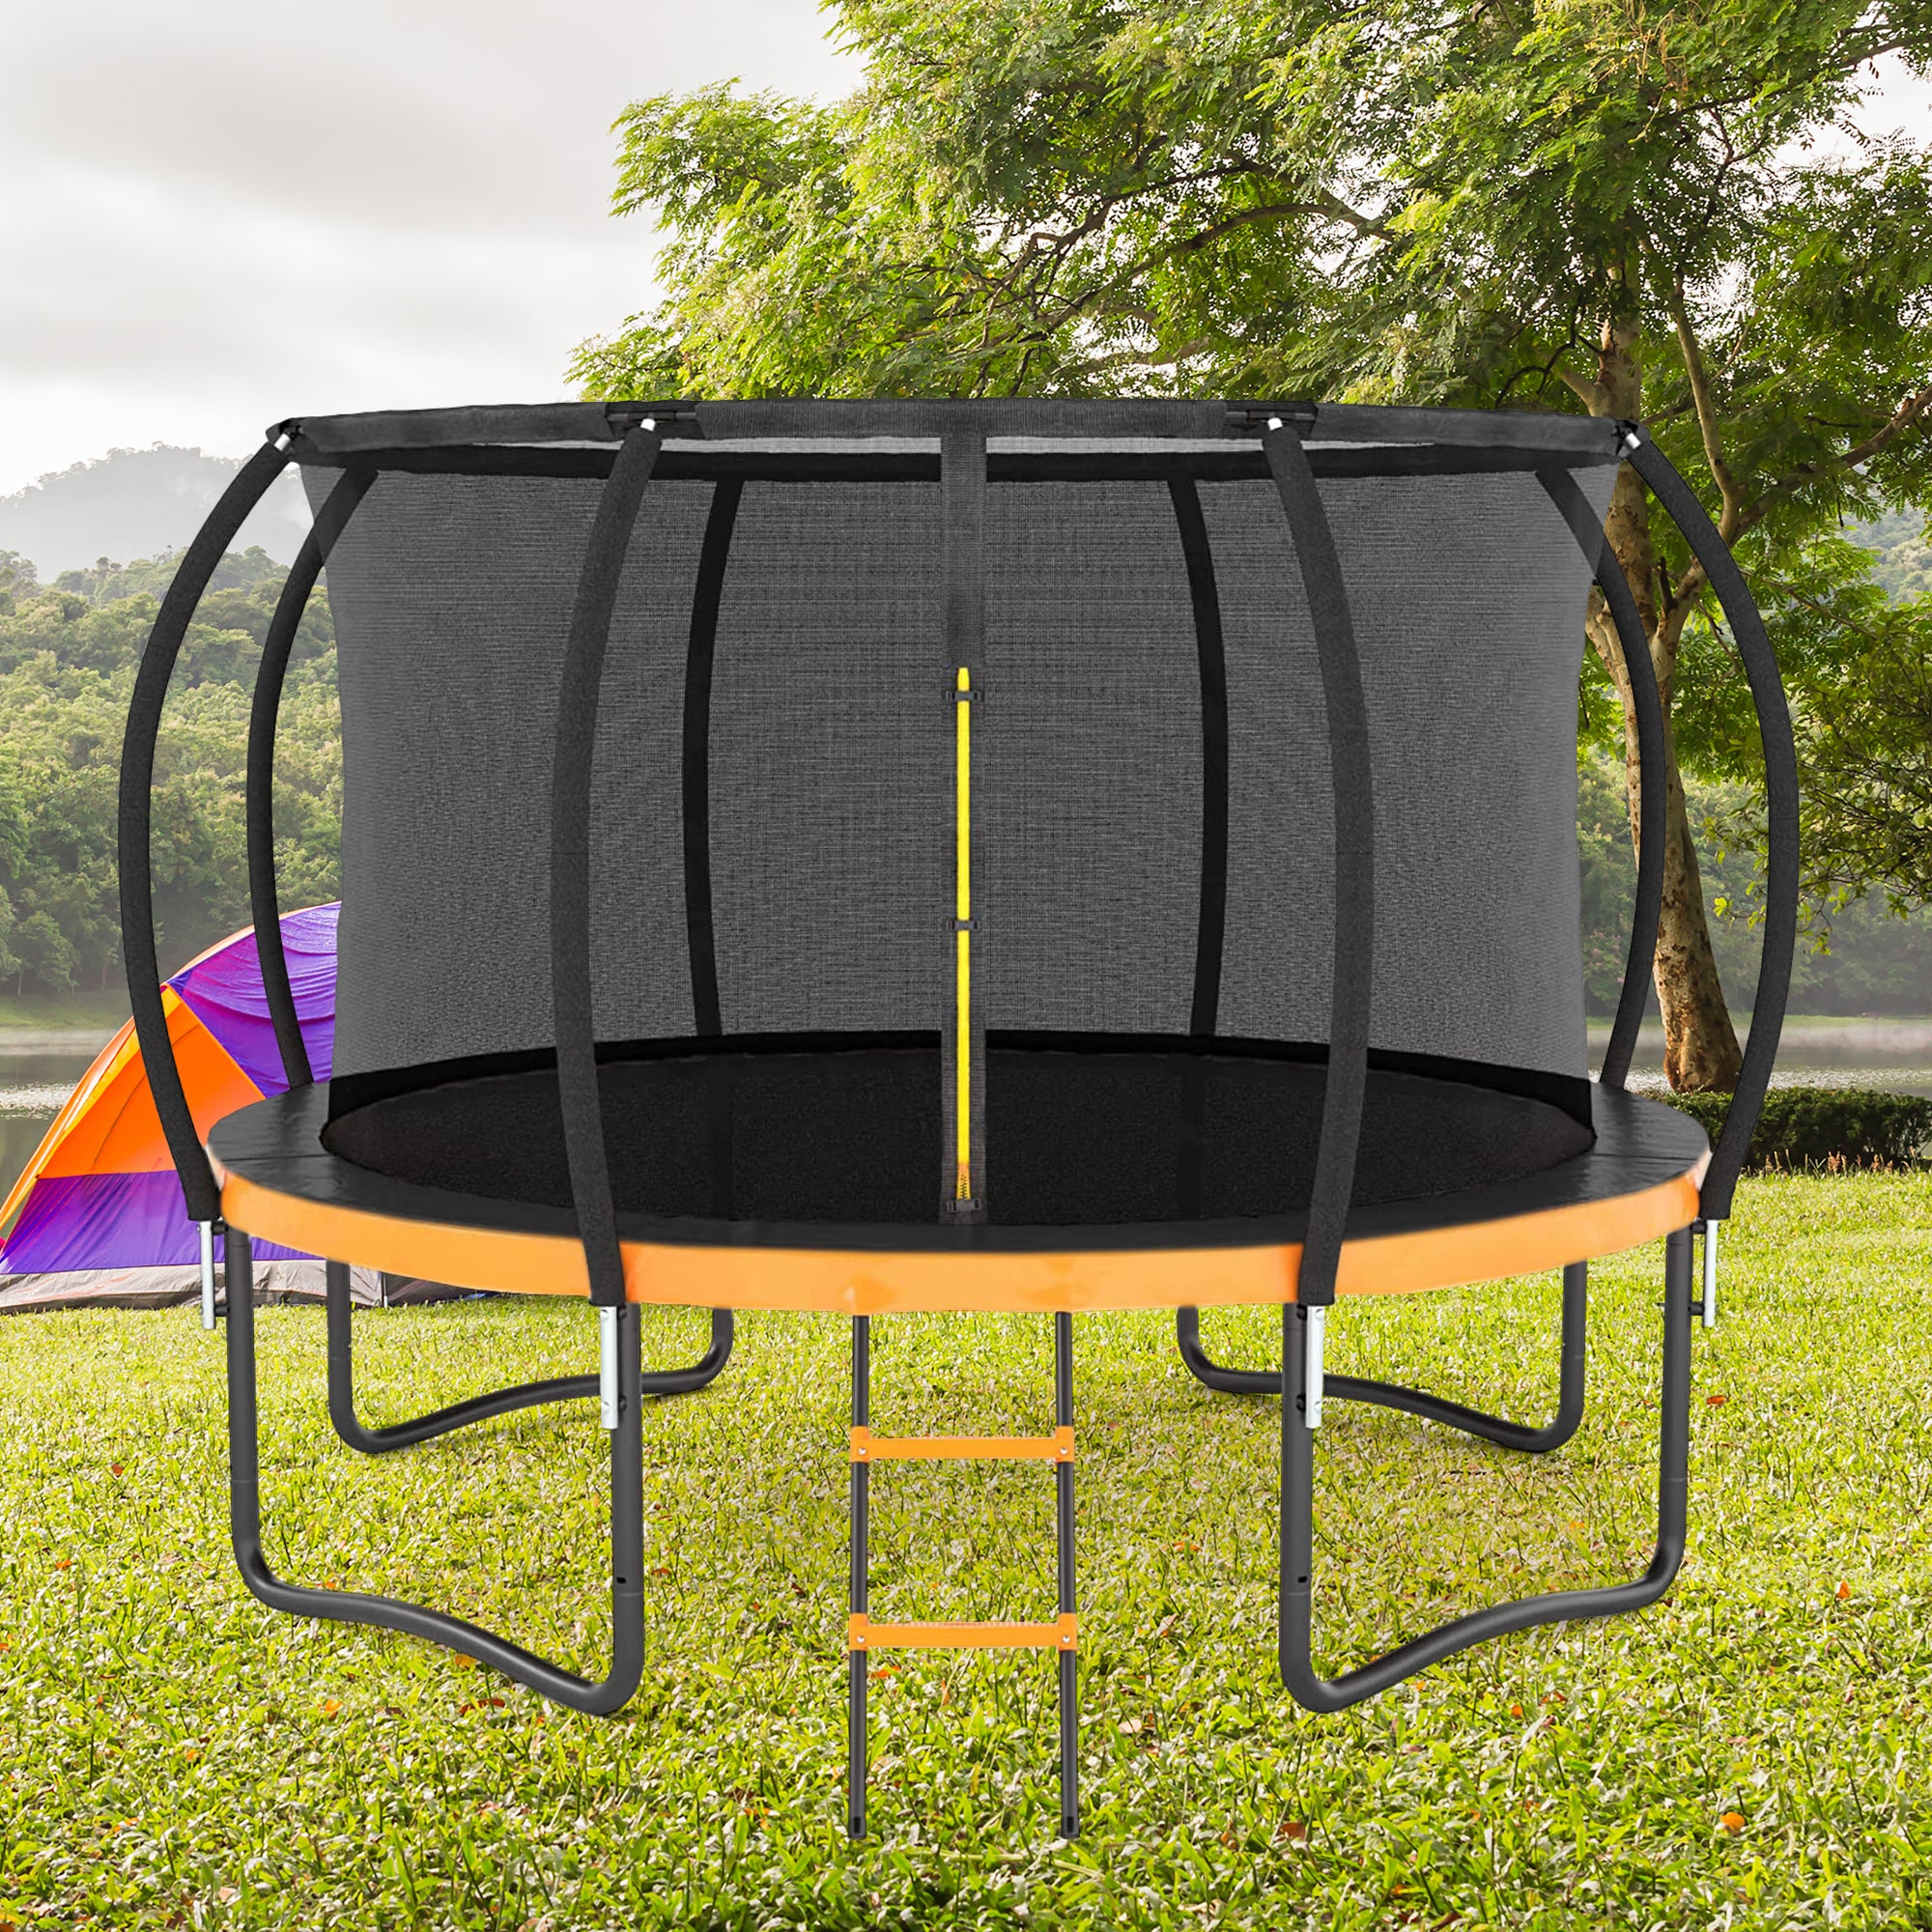 12FT Outdoor Big Trampoline with Inner Safety Enclosure Net, Ladder, PVC Spring Cover Padding - For Kids - Black & Orange Color | Safe and Fun Outdoor Play Equipment |